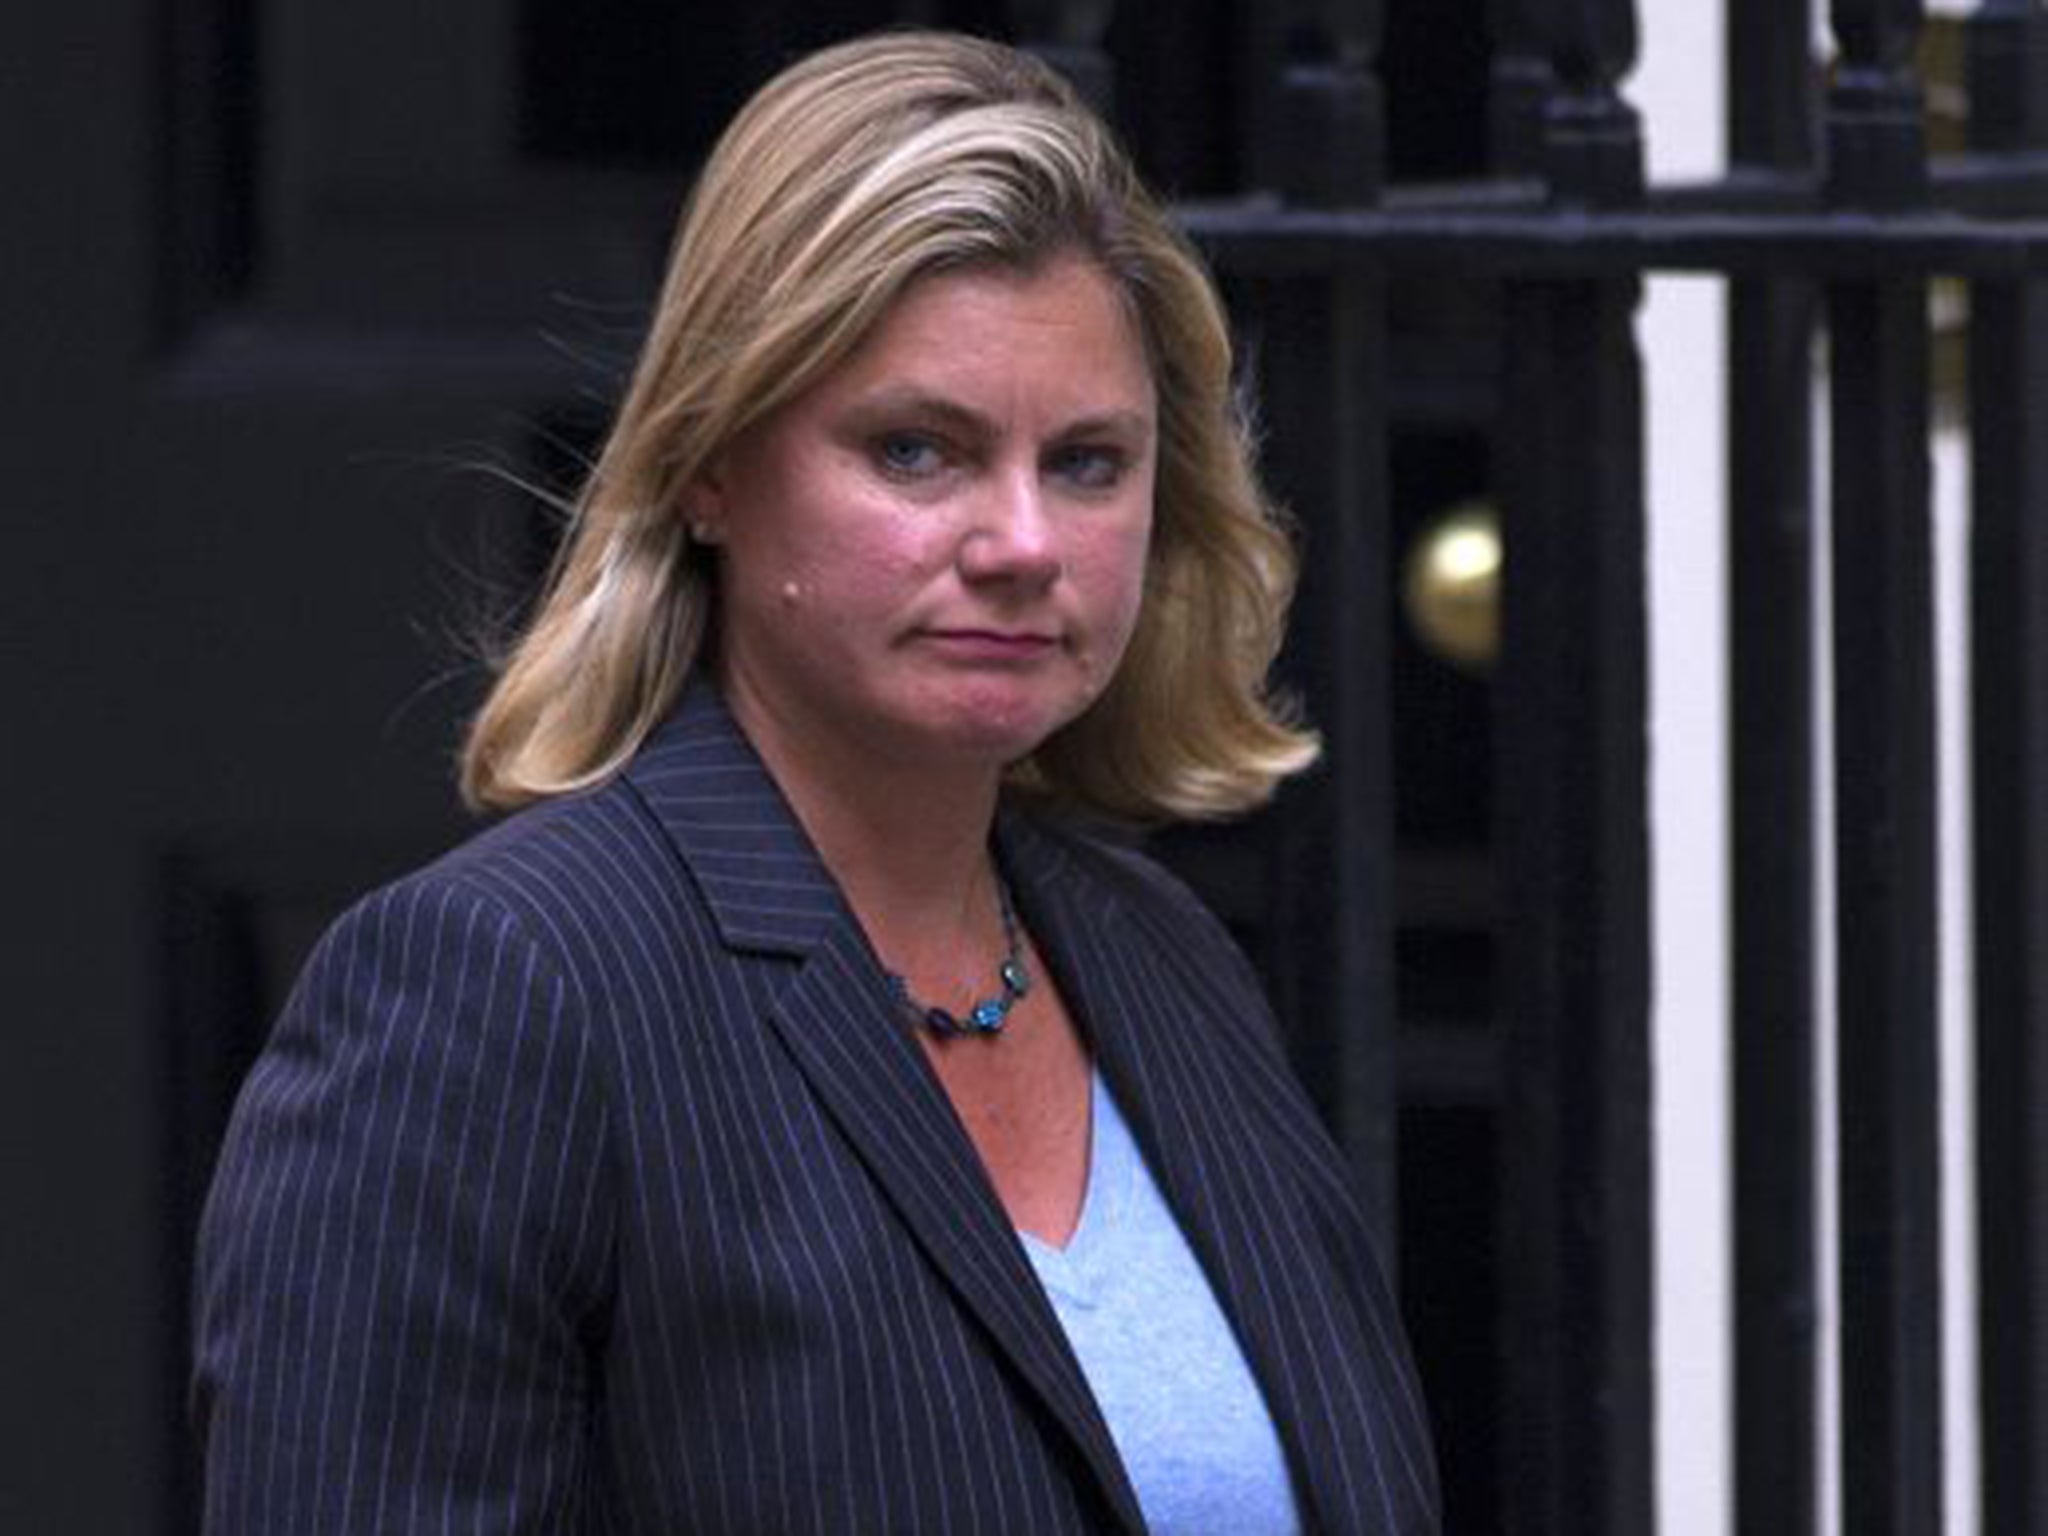 Justine Greening, the Secretary of State for International Development, defended the FCO guidance